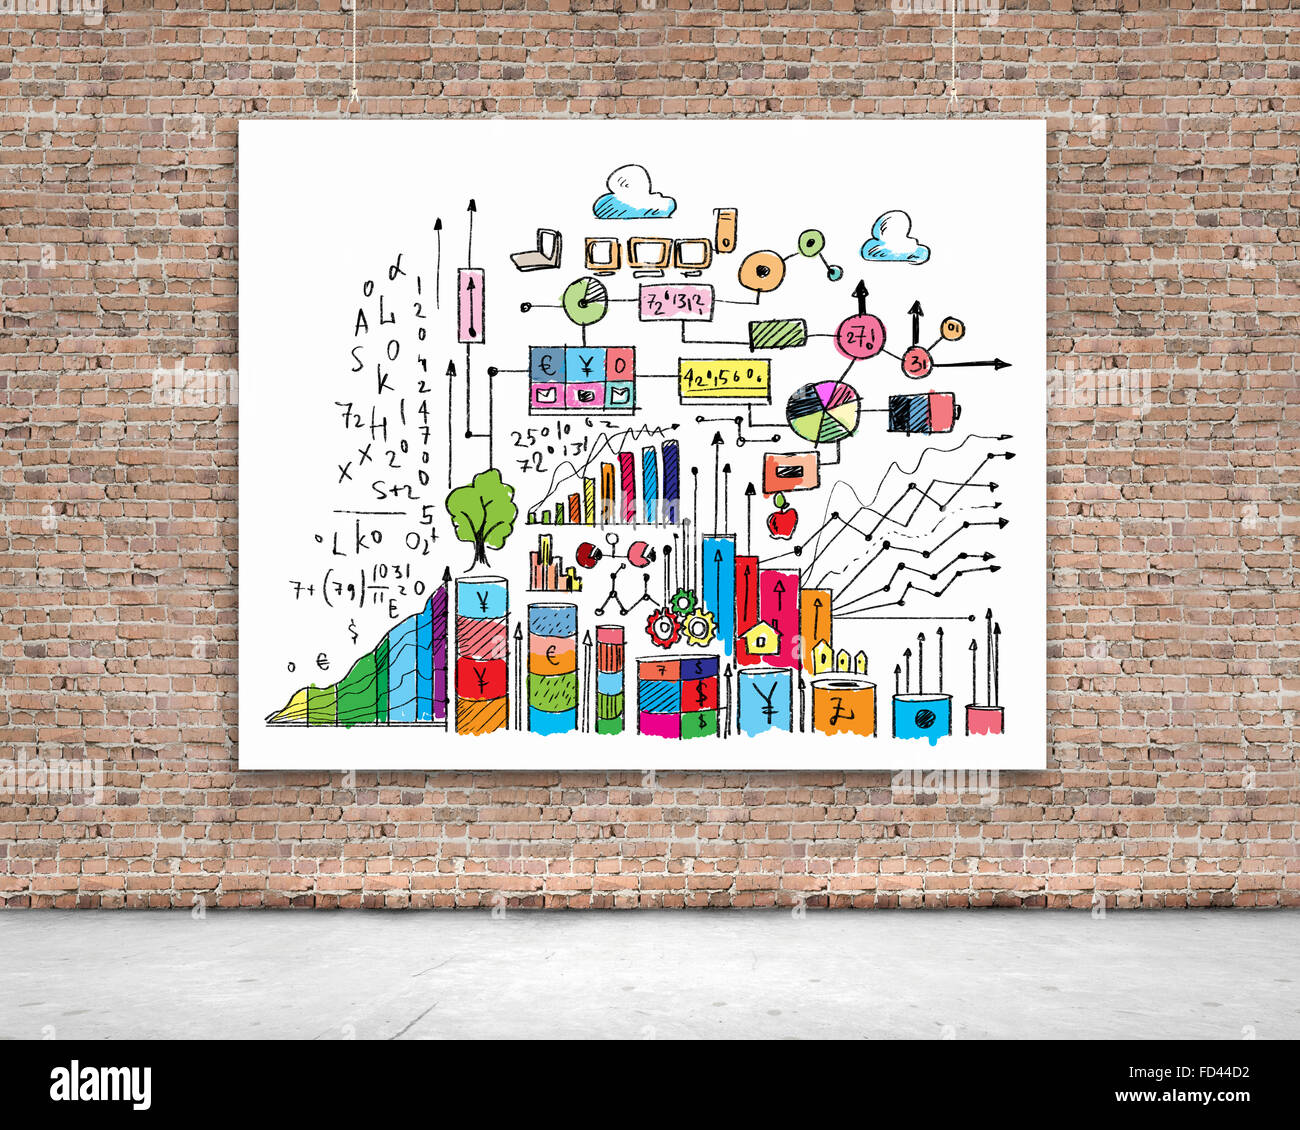 Hanging banner with business plan, graphics and diagrams Stock Photo